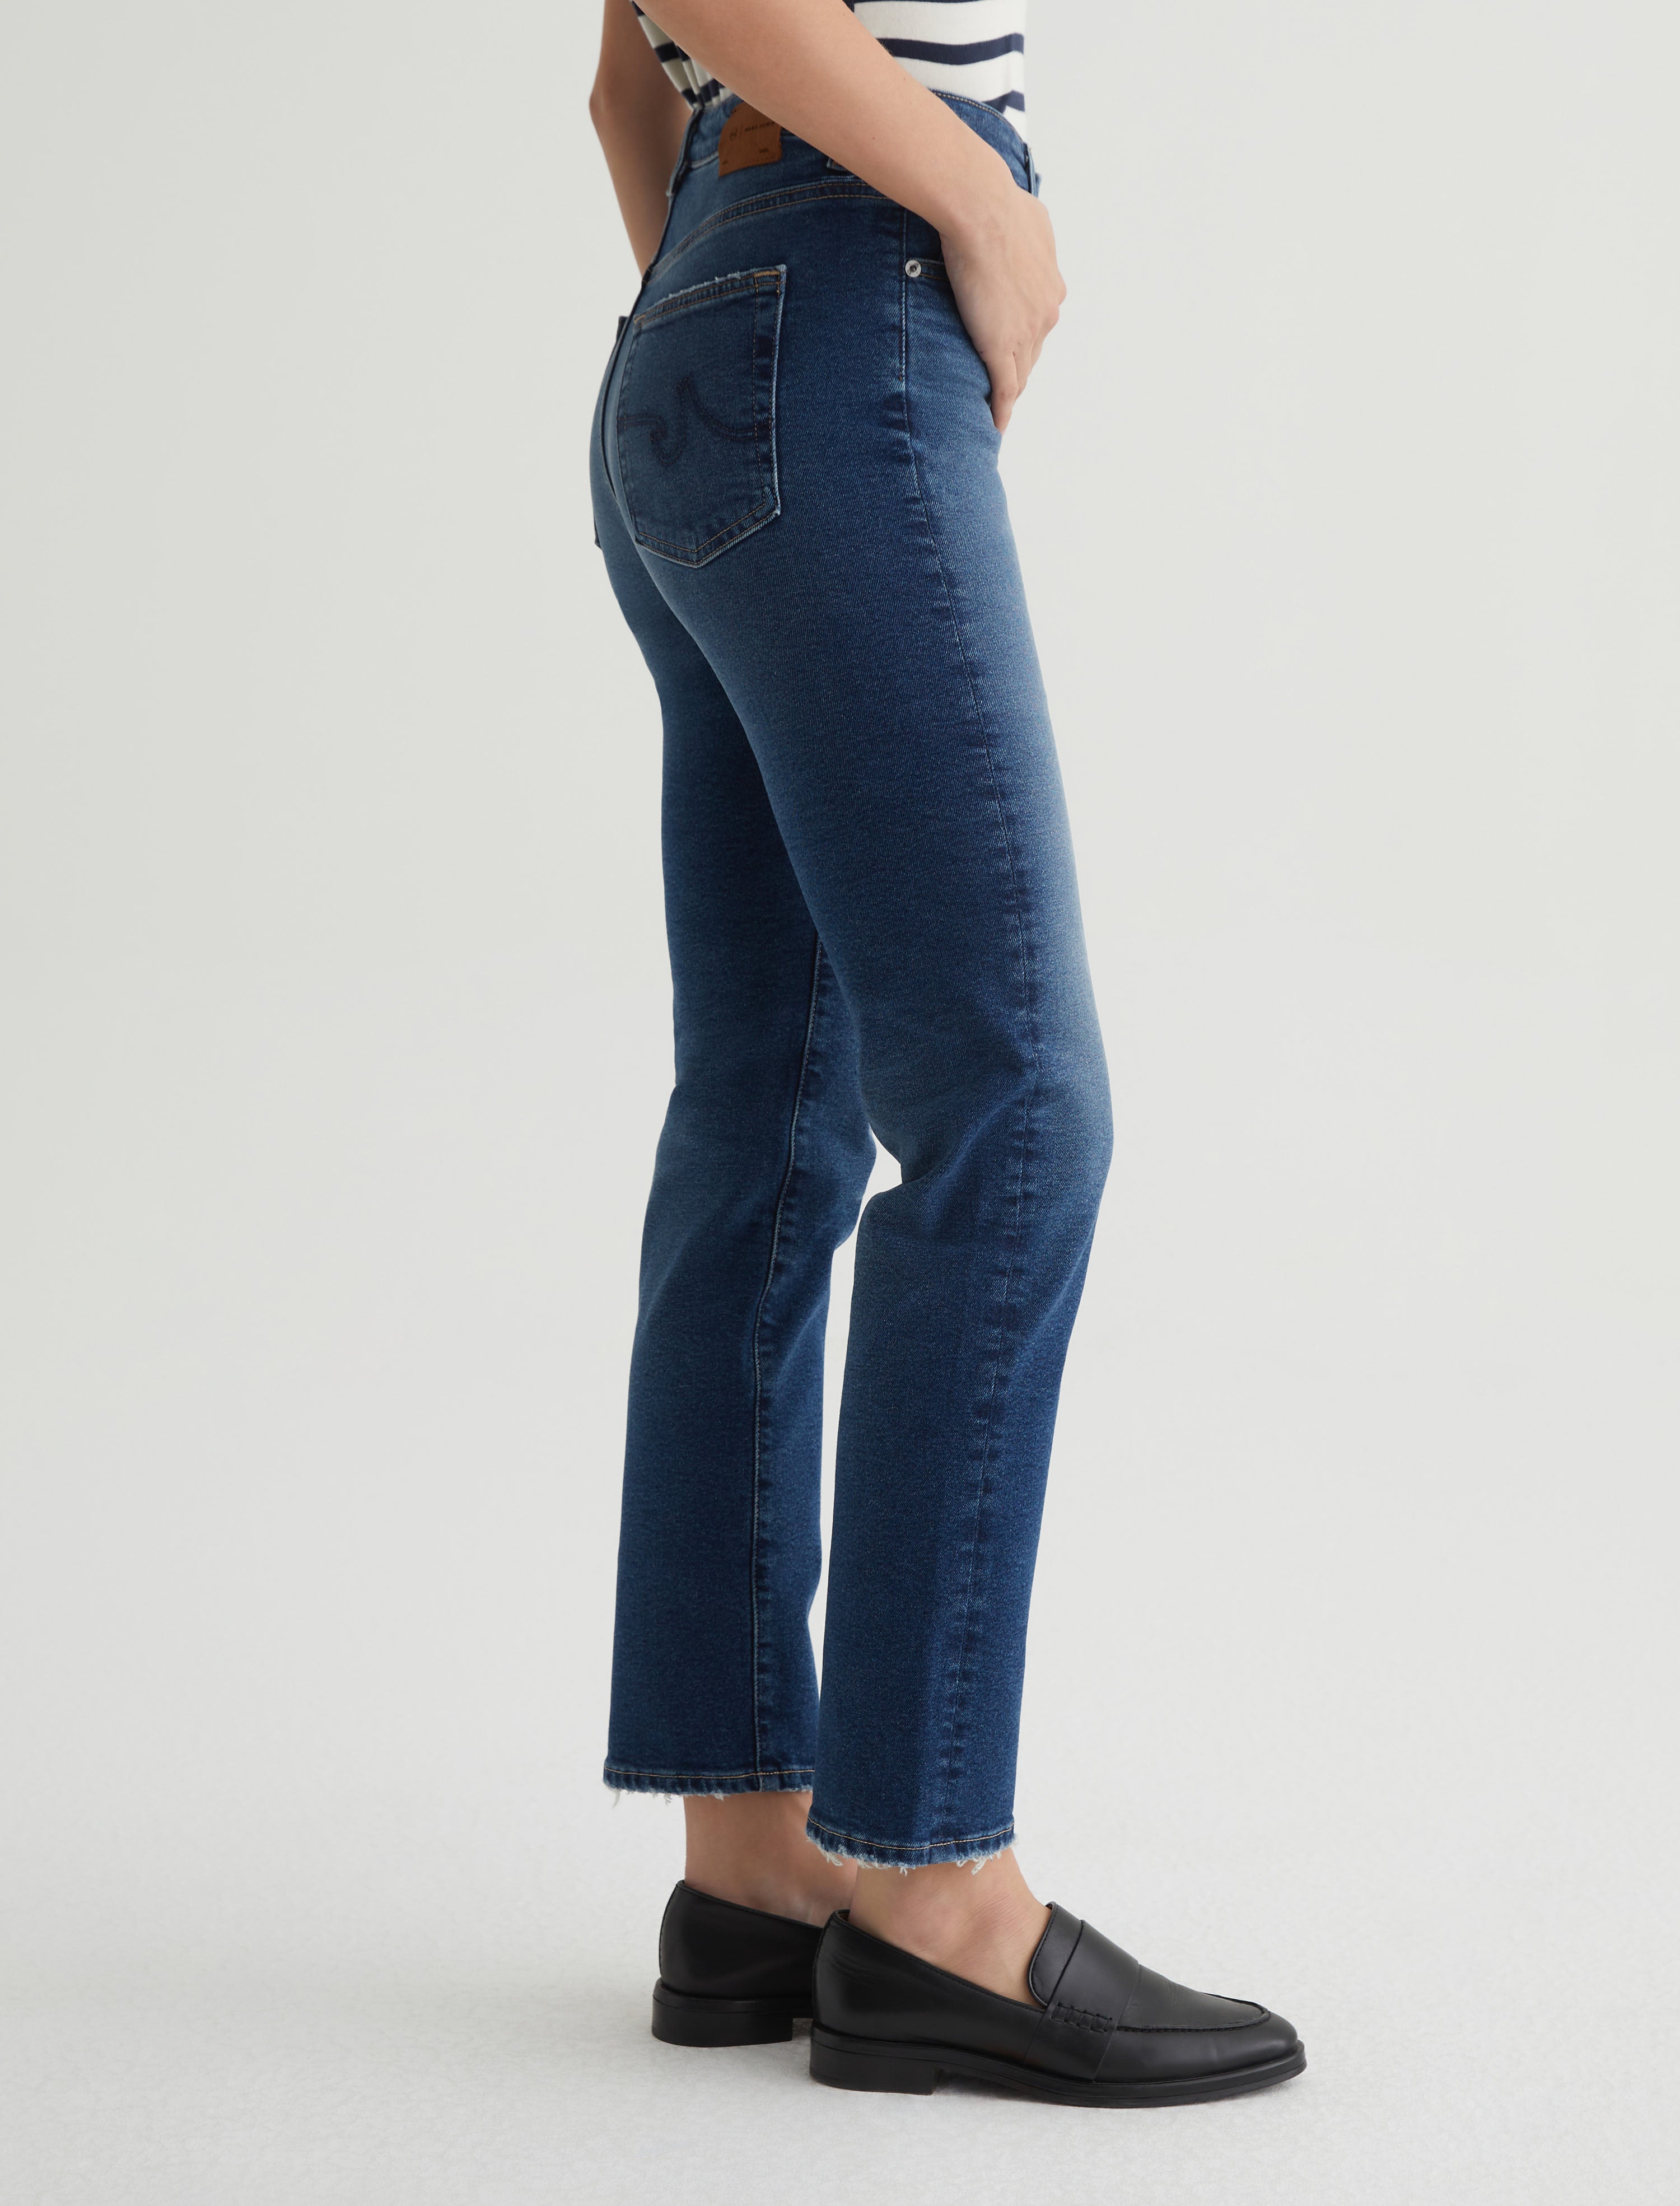 Womens Rian 18 Years Creekside at AG Jeans Official Store